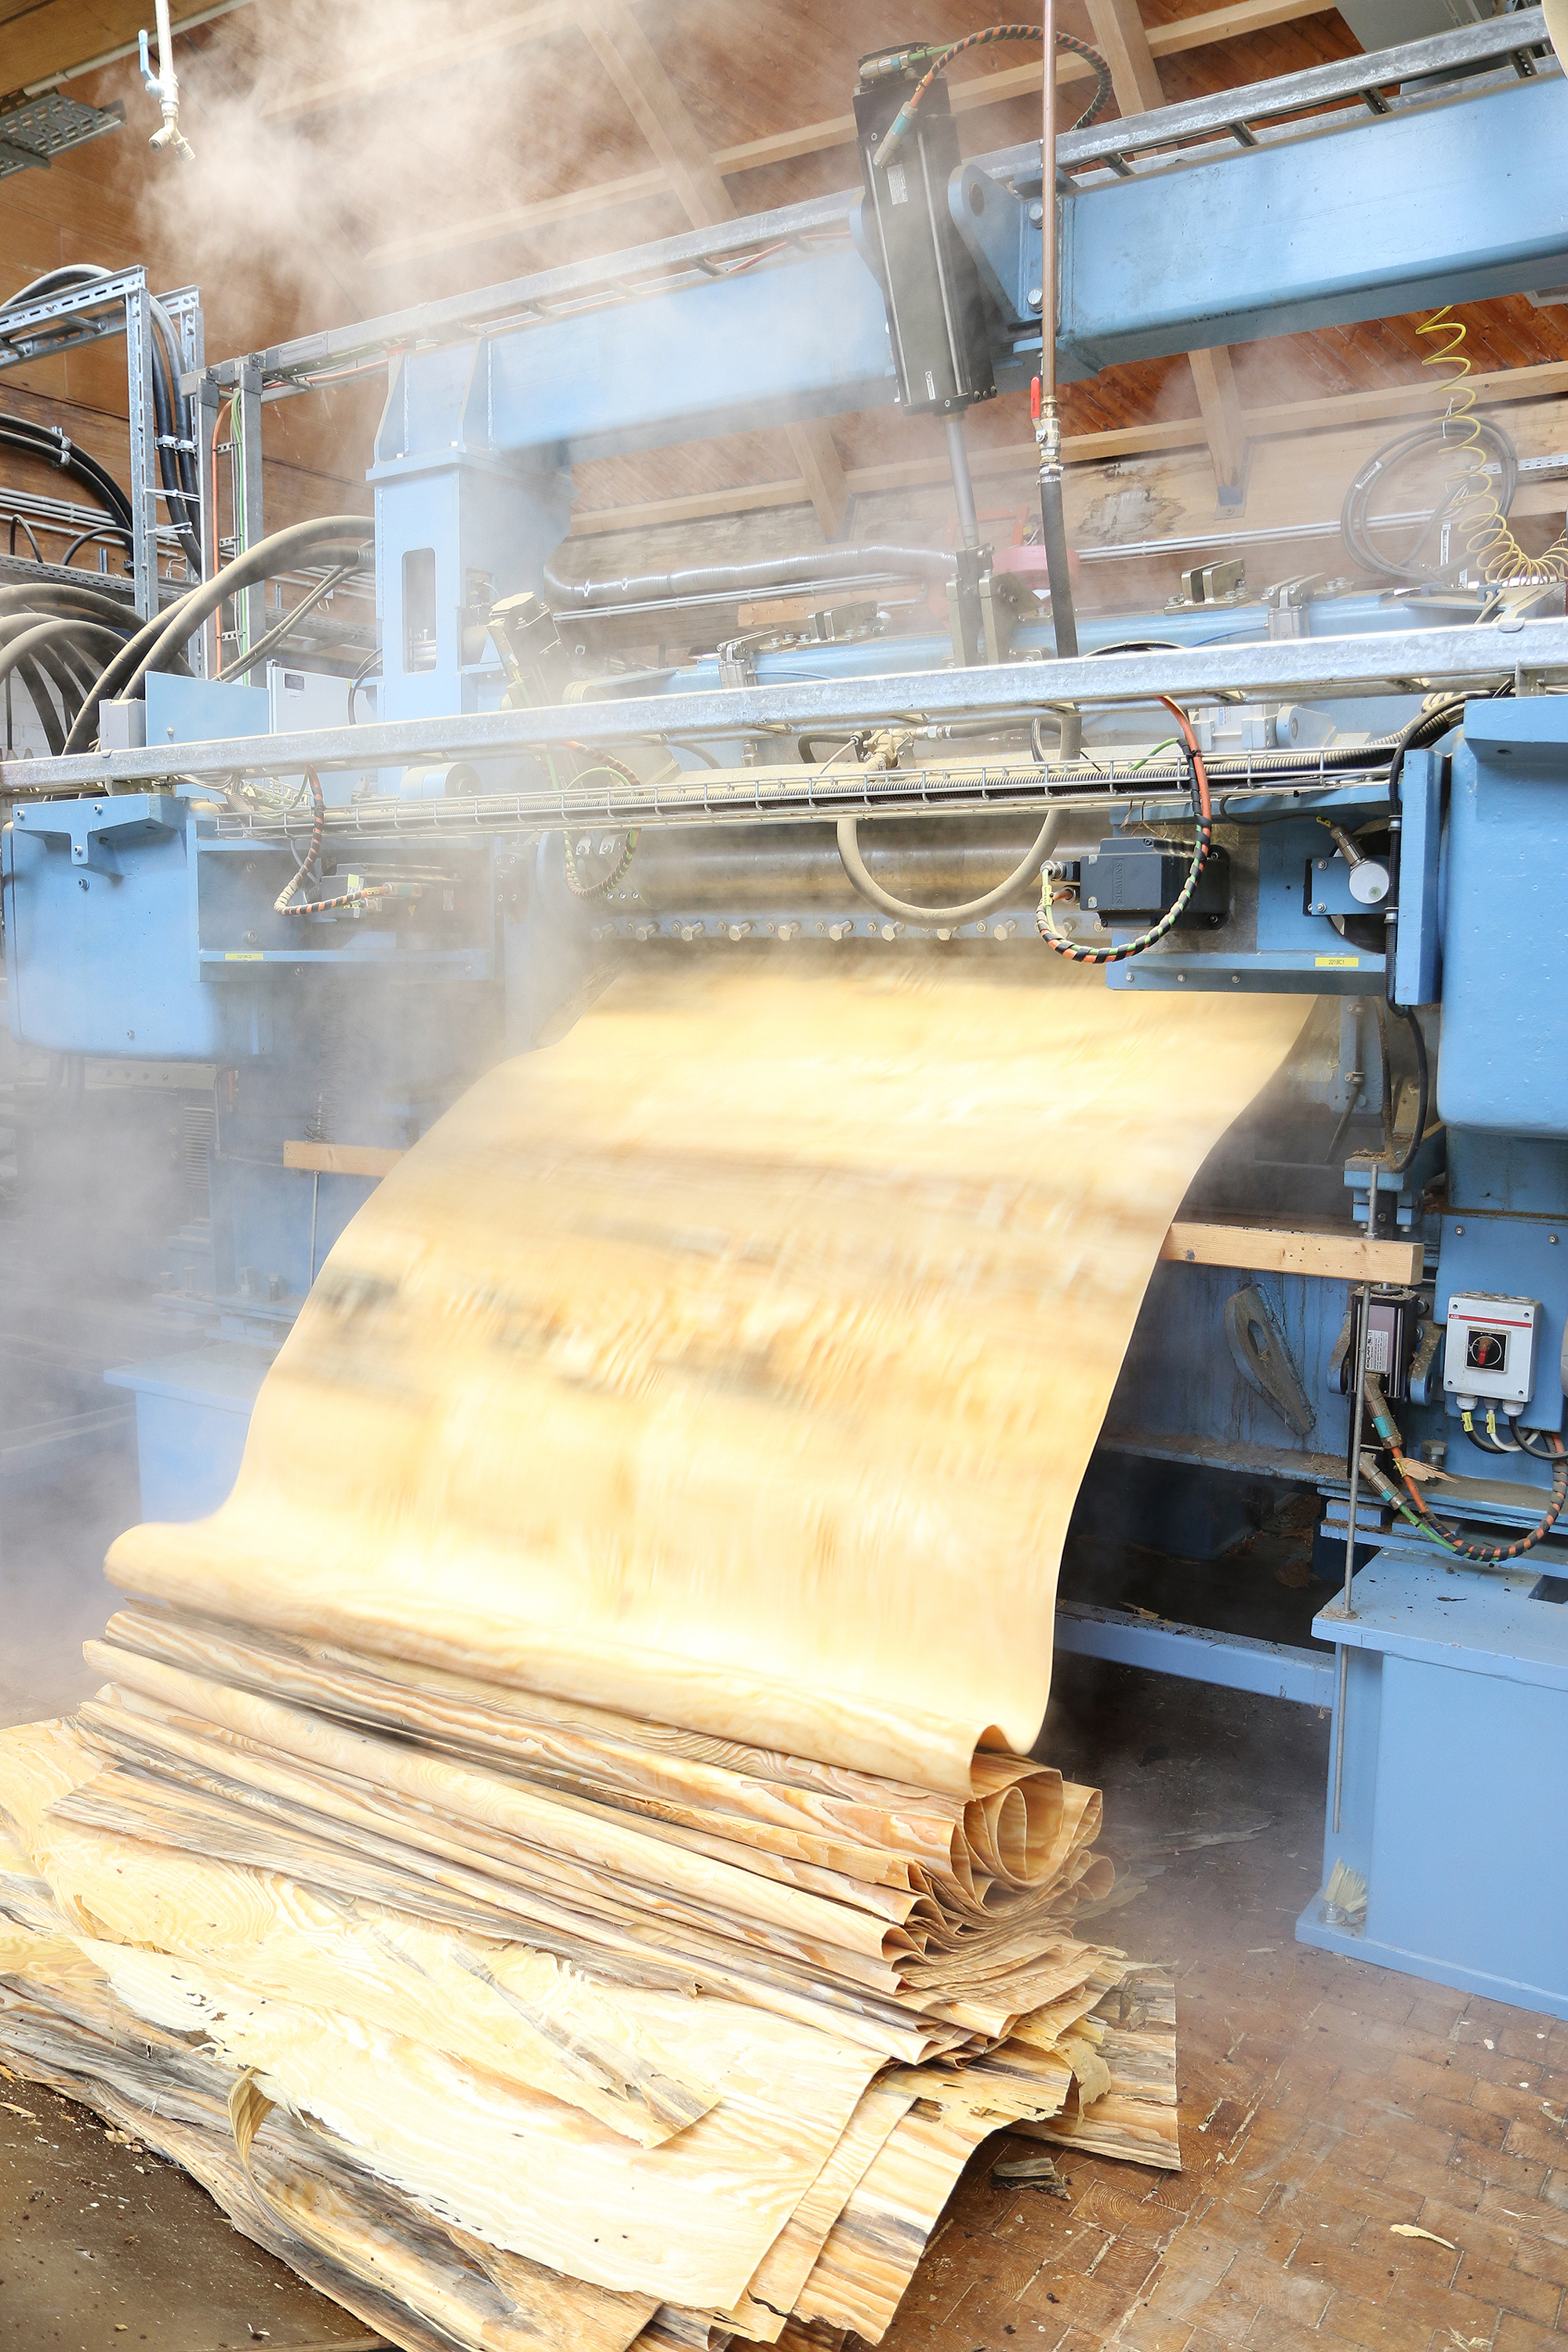 The photo shows a peeling machine from which the peeled veneer is flowing out and accumulating in layers on the floor.